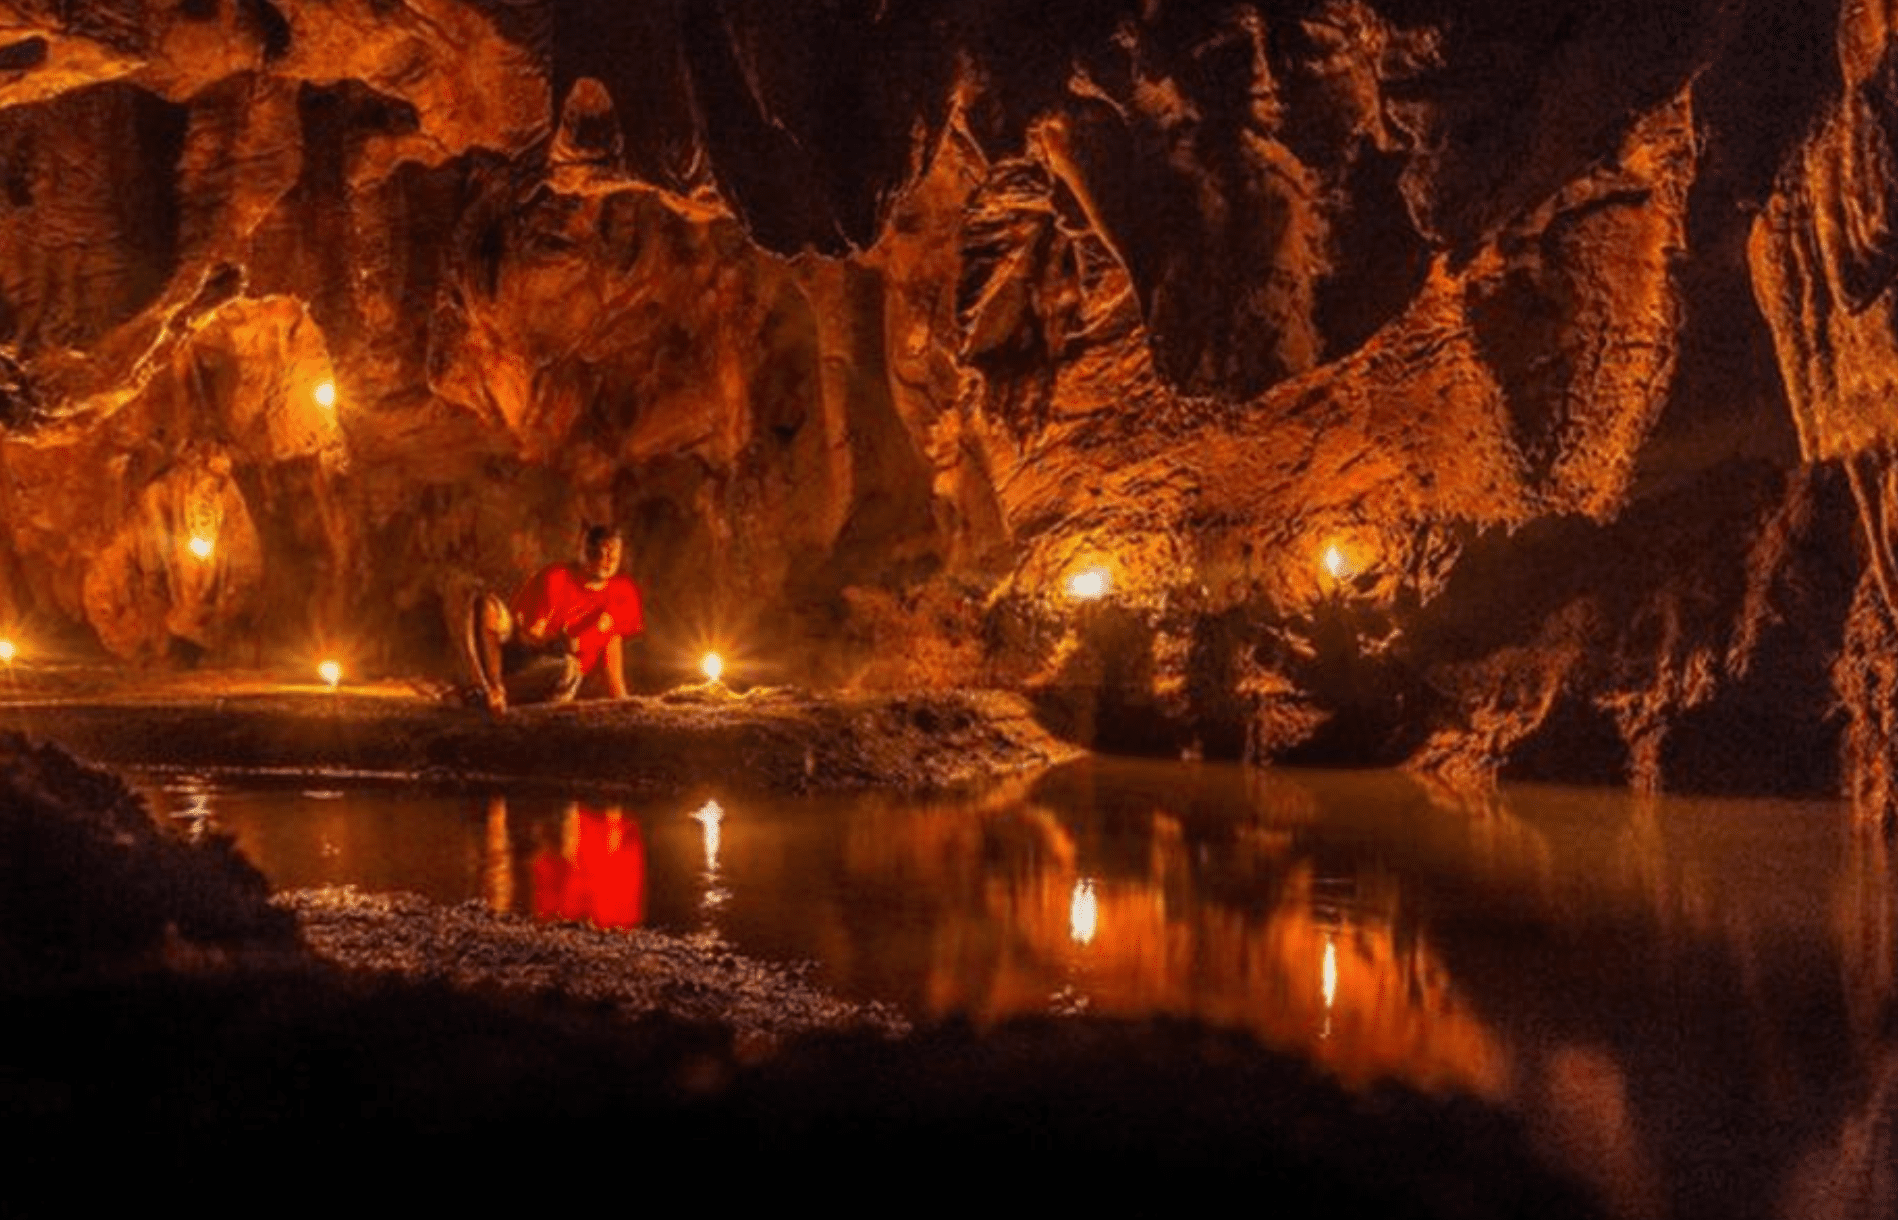 exploring the K'anba Caves by candlelight